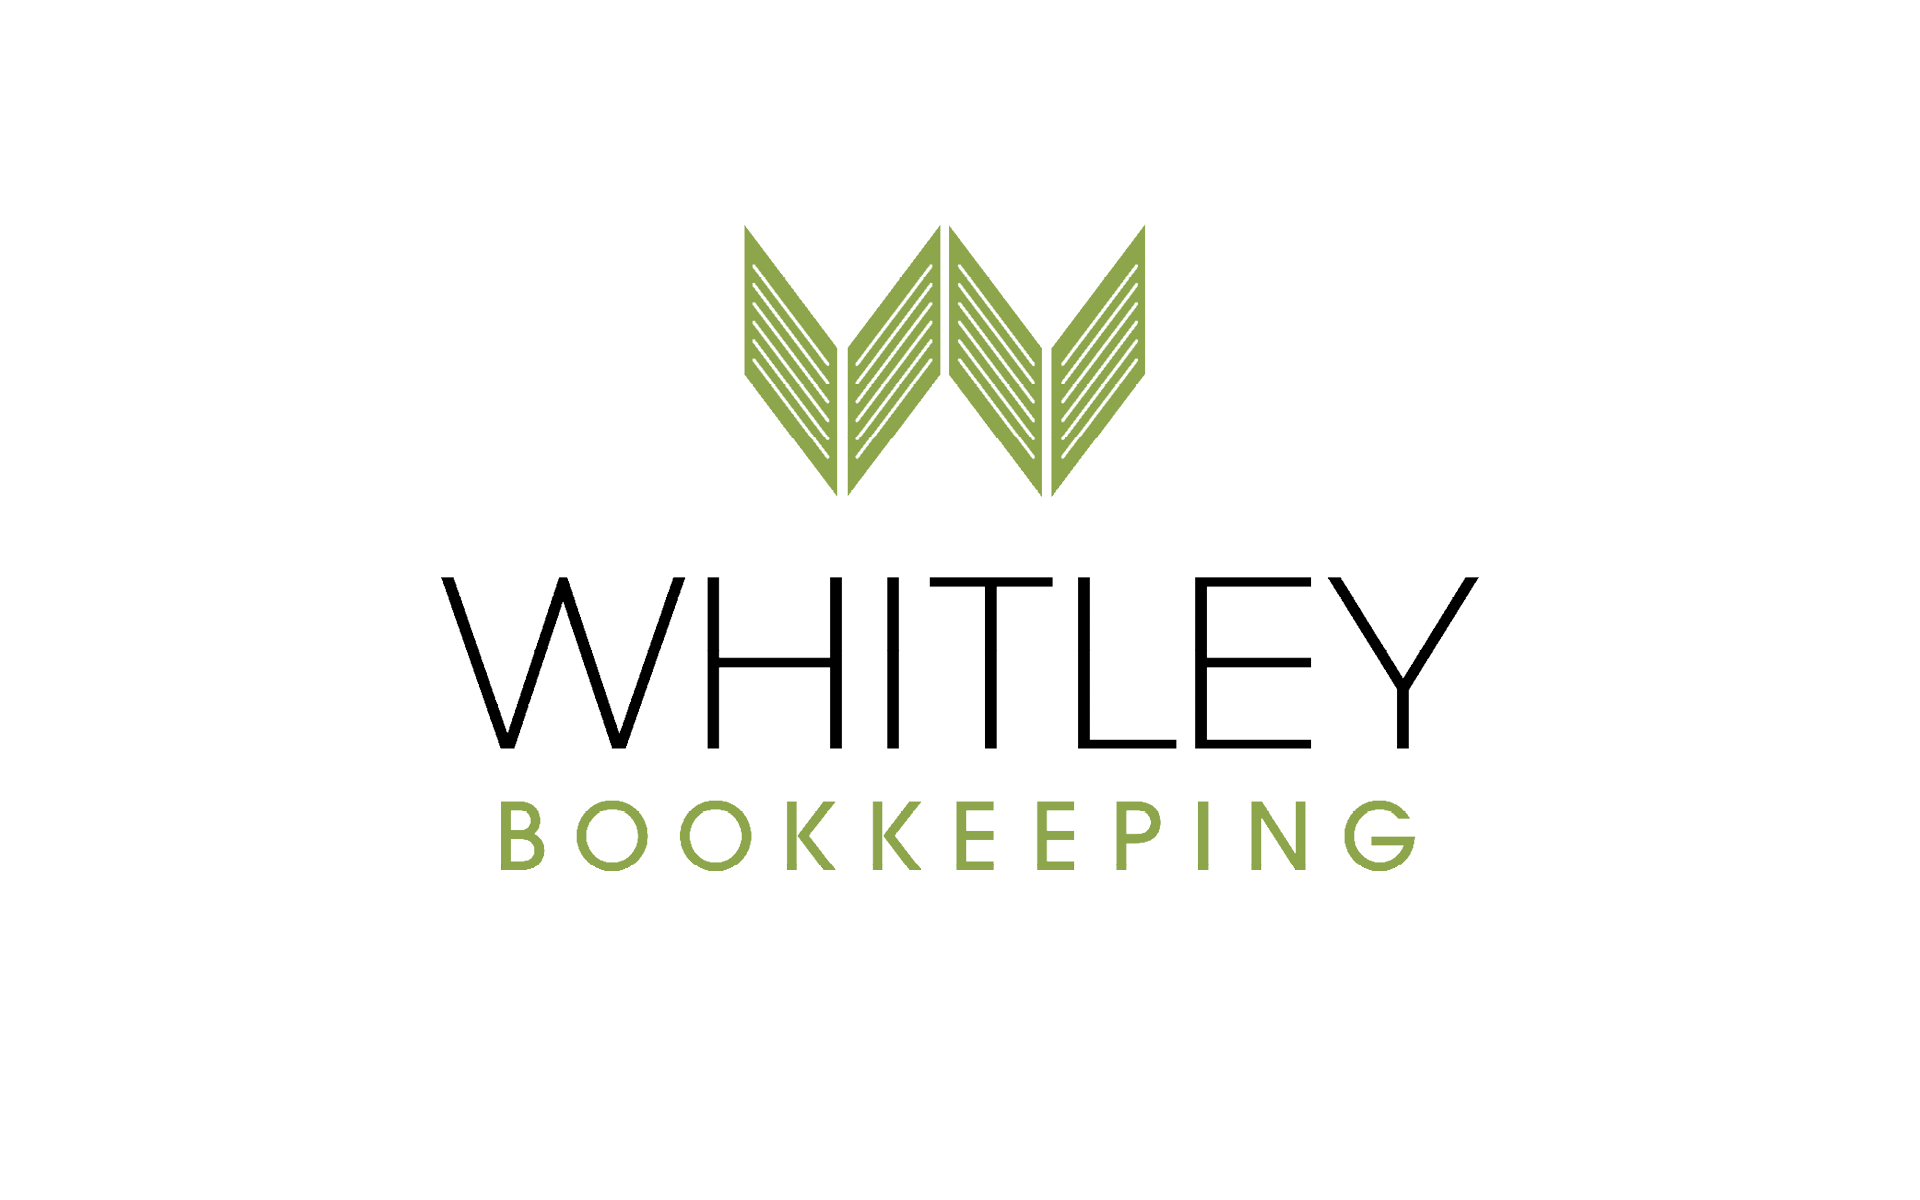 WHITLEY BOOKKEEPING Julianne.whitley@gmail.com | (214) 417-2222